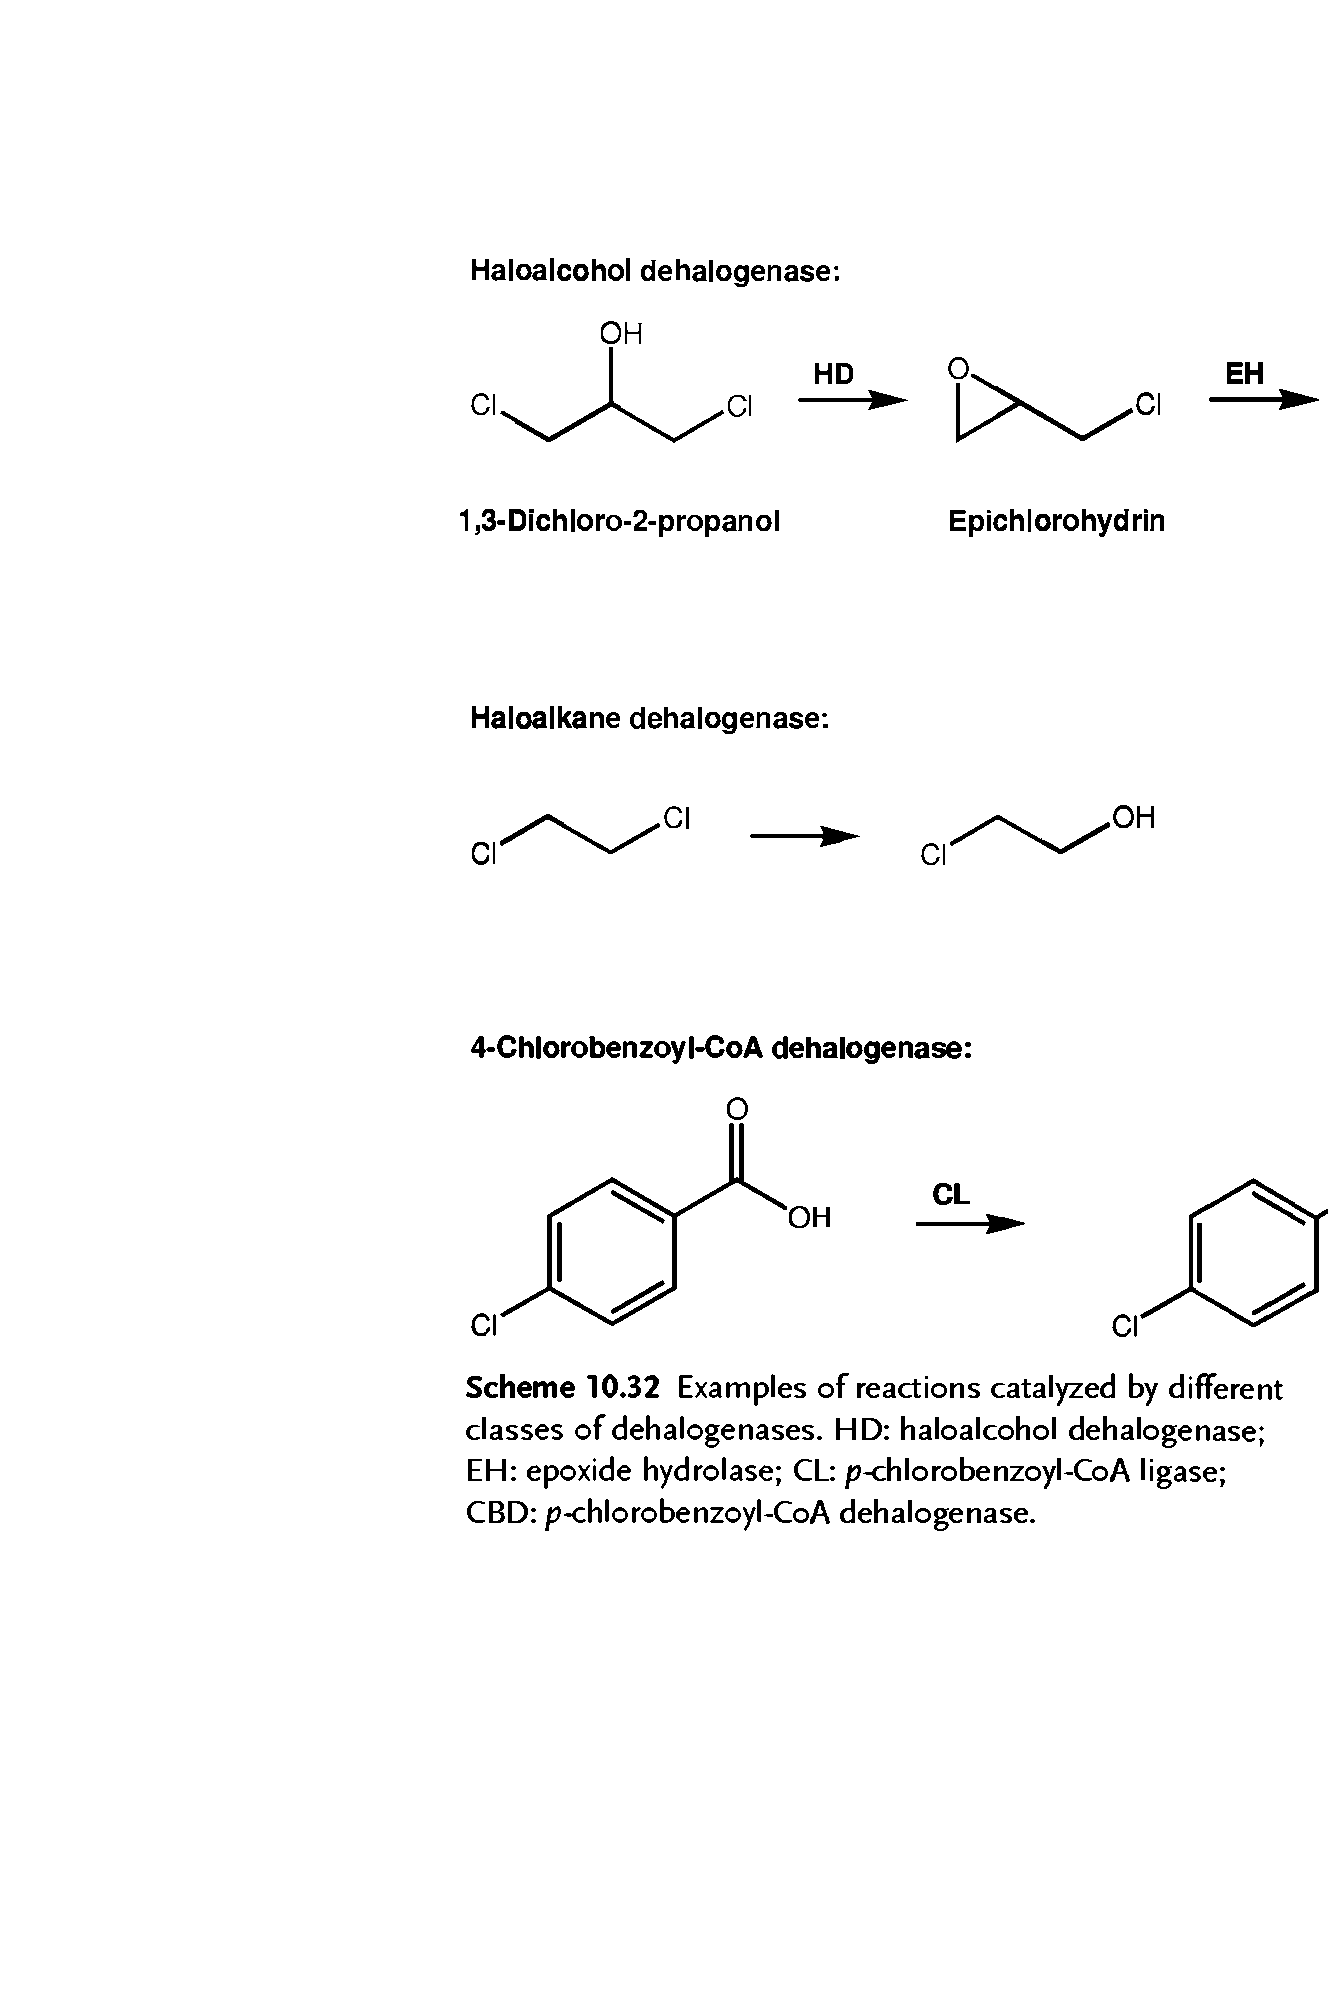 Scheme 10.32 Examples of reactions catalyzed by different classes of dehalogenases. HD haloalcohol dehalogenase EH epoxide hydrolase CL p-chlorobenzoyl-CoA ligase CBD p-chlorobenzoyl-CoA dehalogenase.